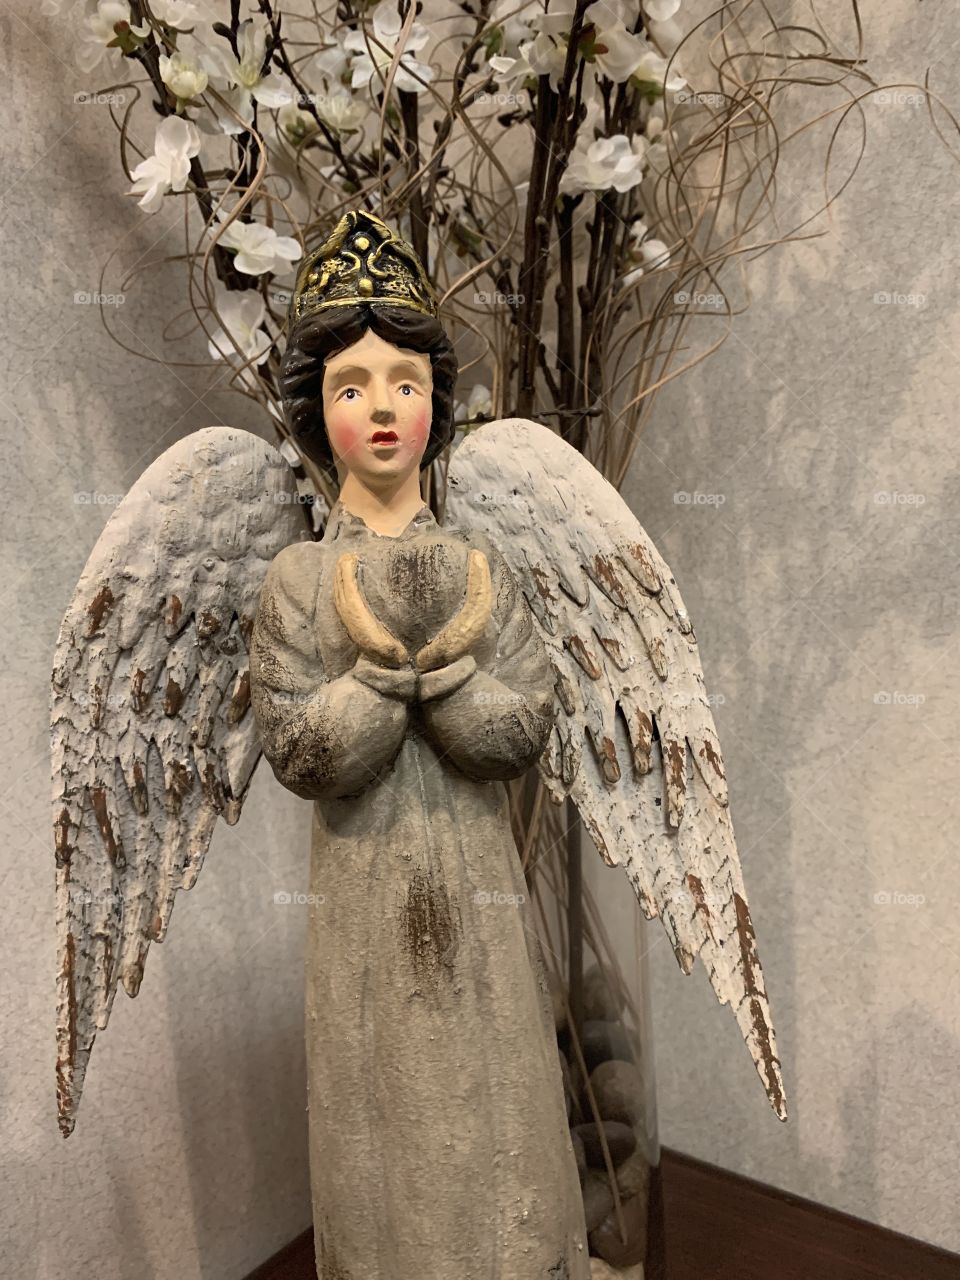 Angel with wings statue displayed in front of white flowers and twigs for the Christmas holiday season. USA, America 